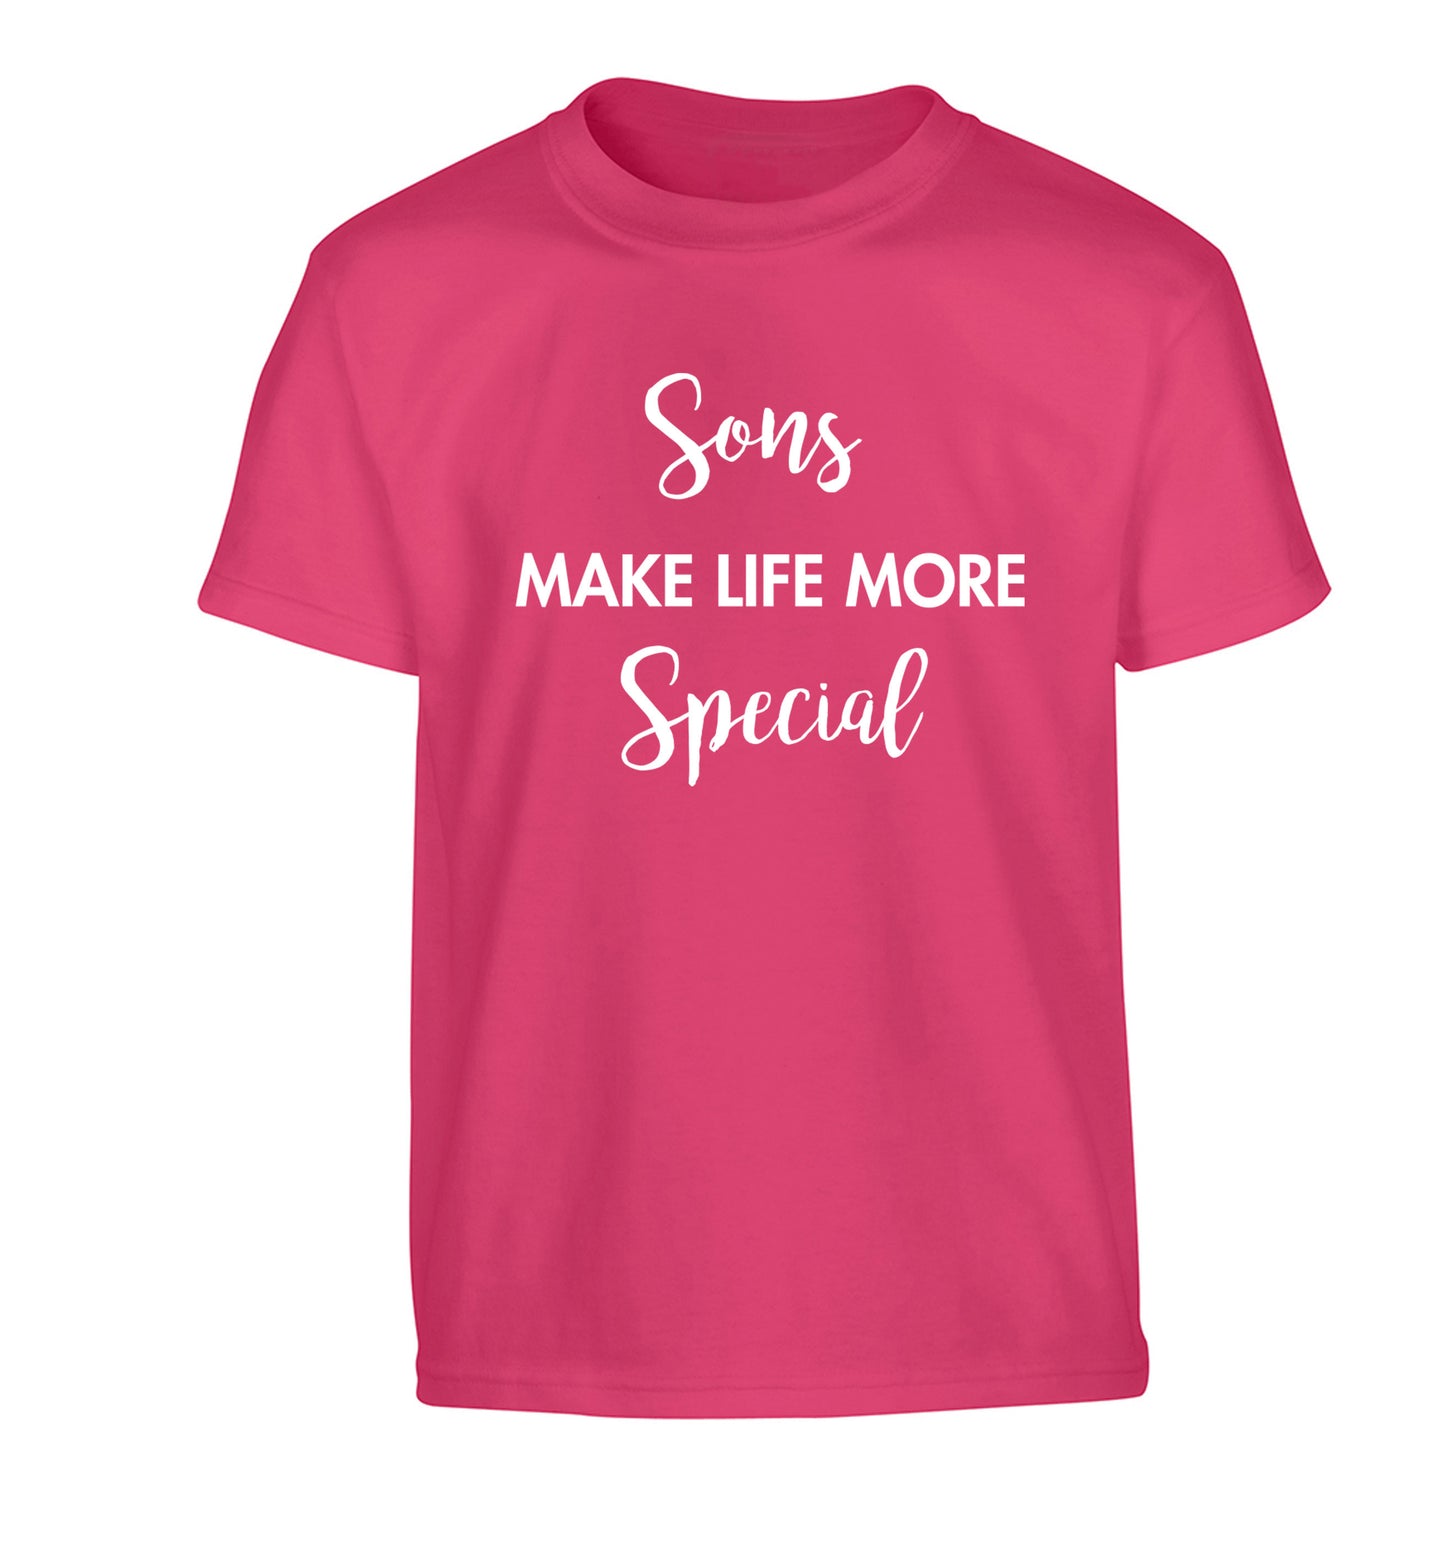 Sons make life more special Children's pink Tshirt 12-14 Years